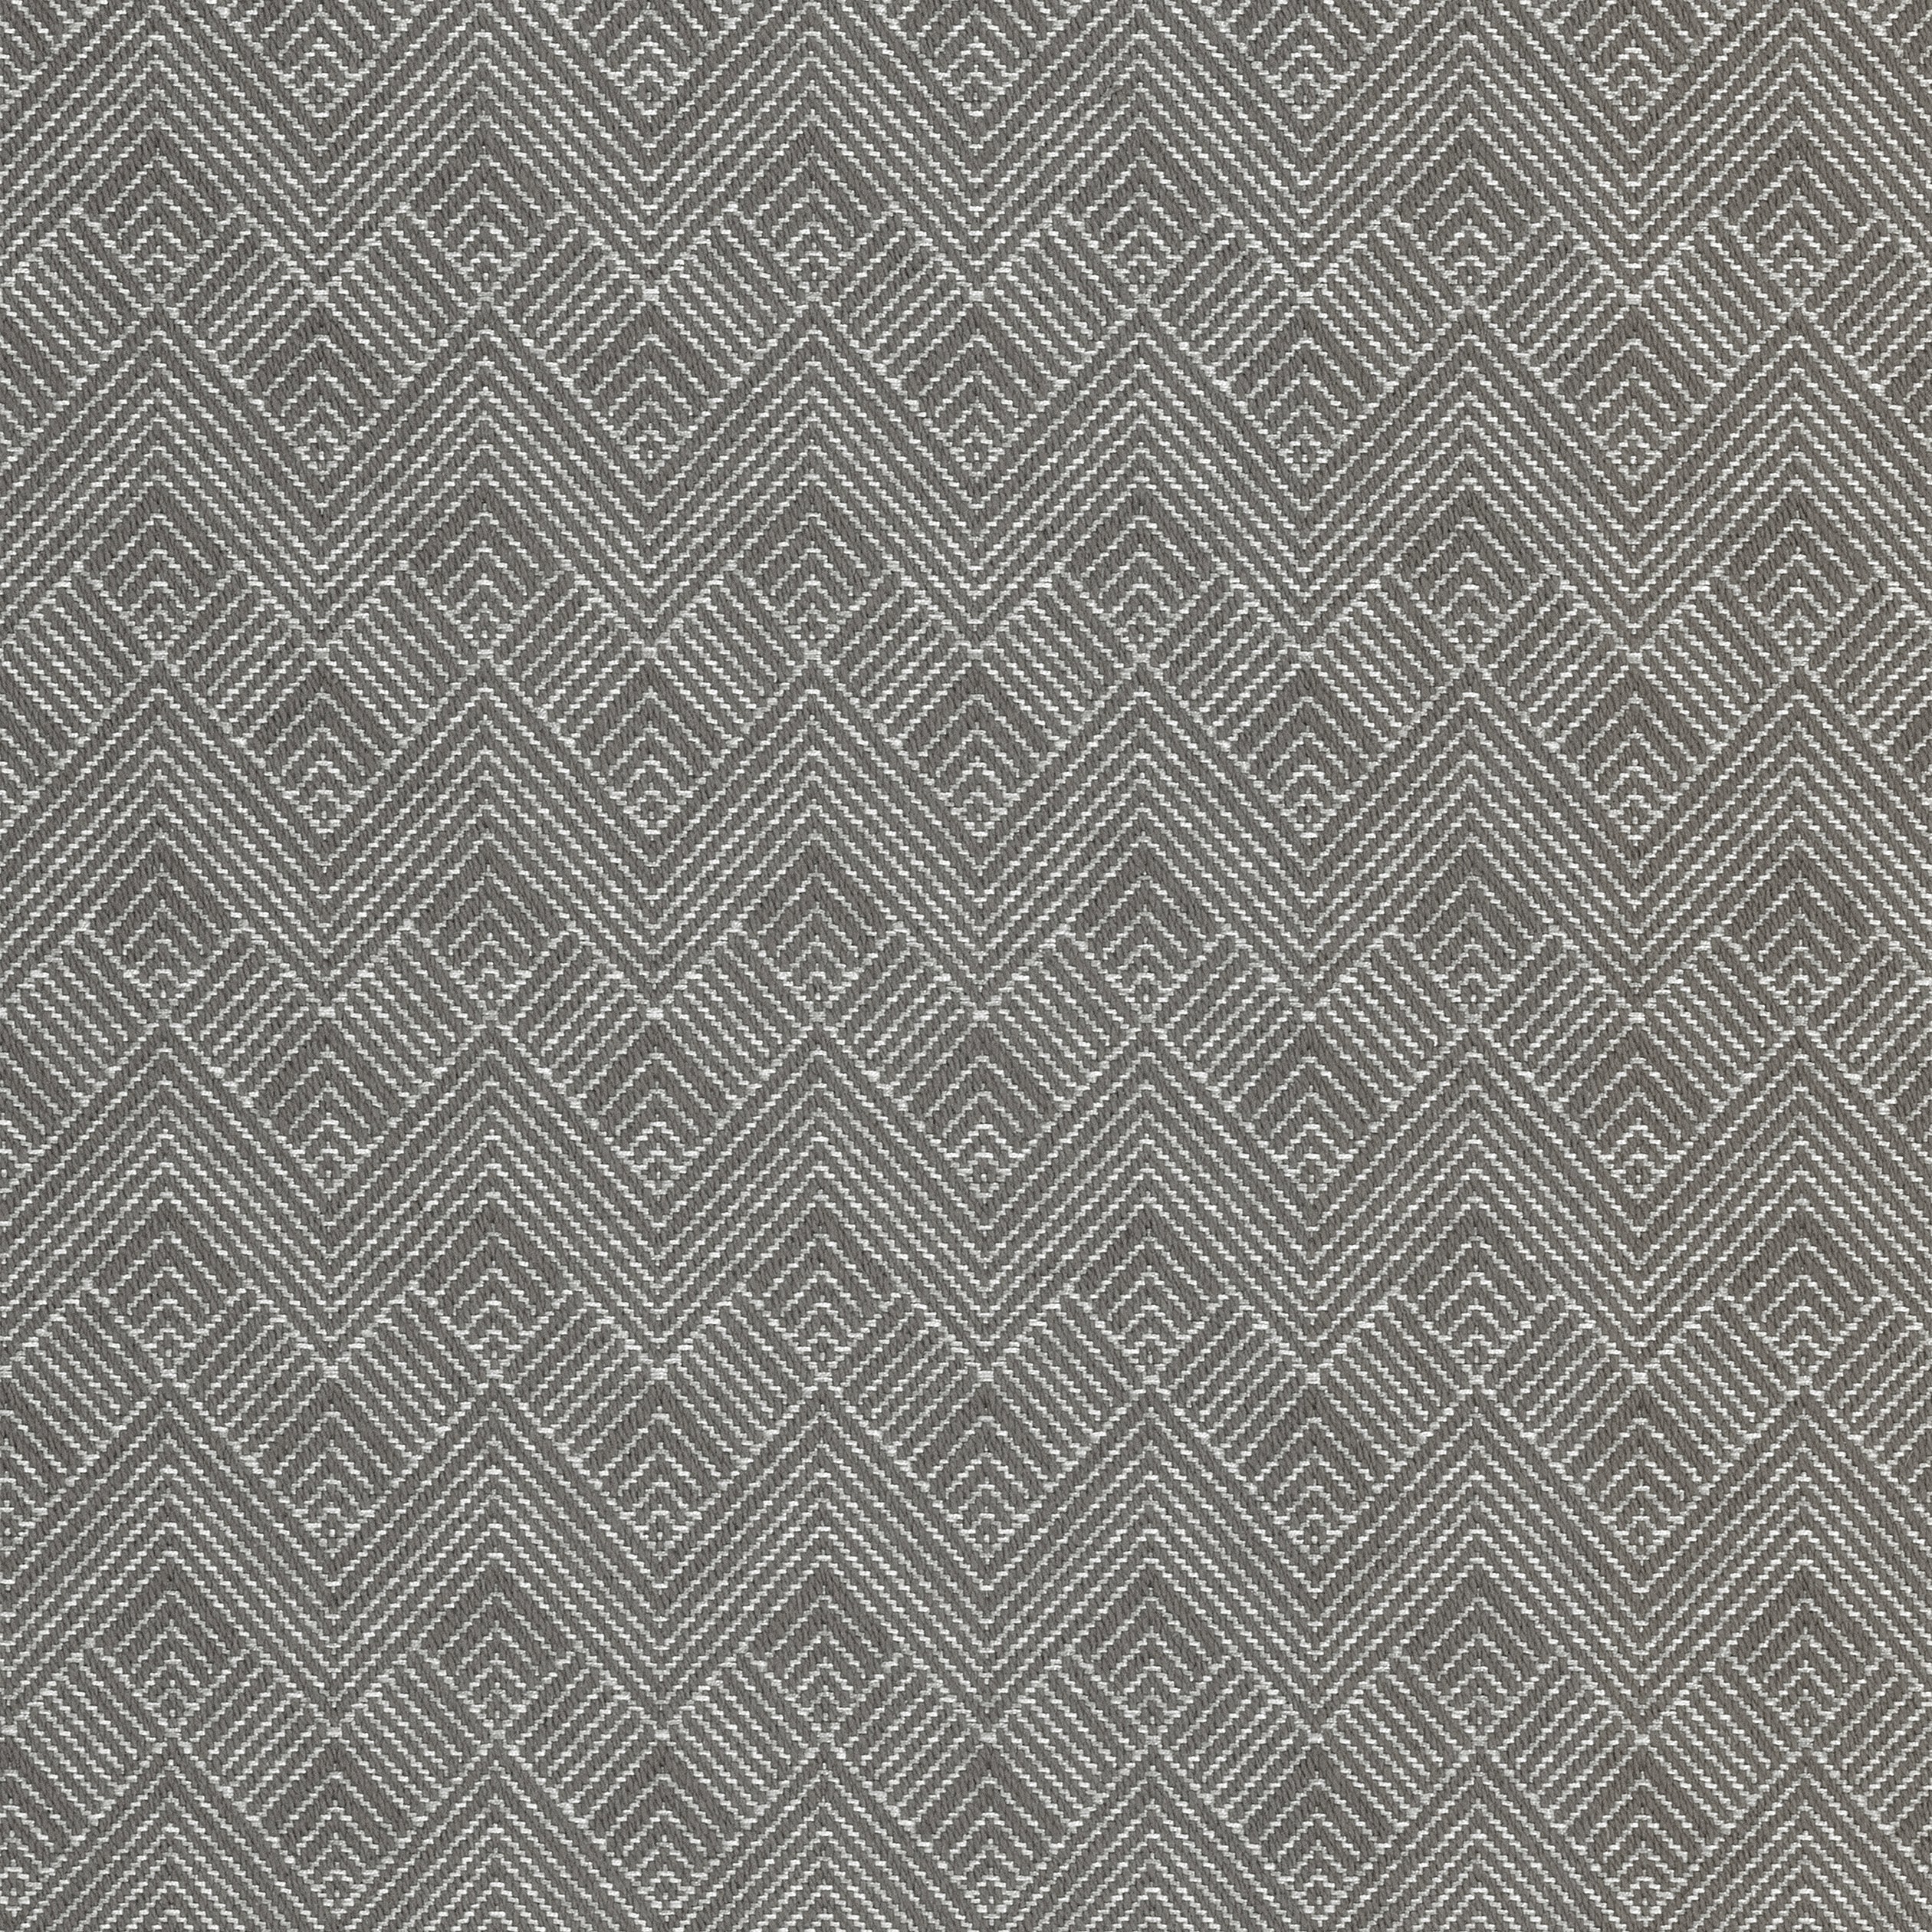 Maddox fabric in charcoal color - pattern number W73335 - by Thibaut in the Nomad collection